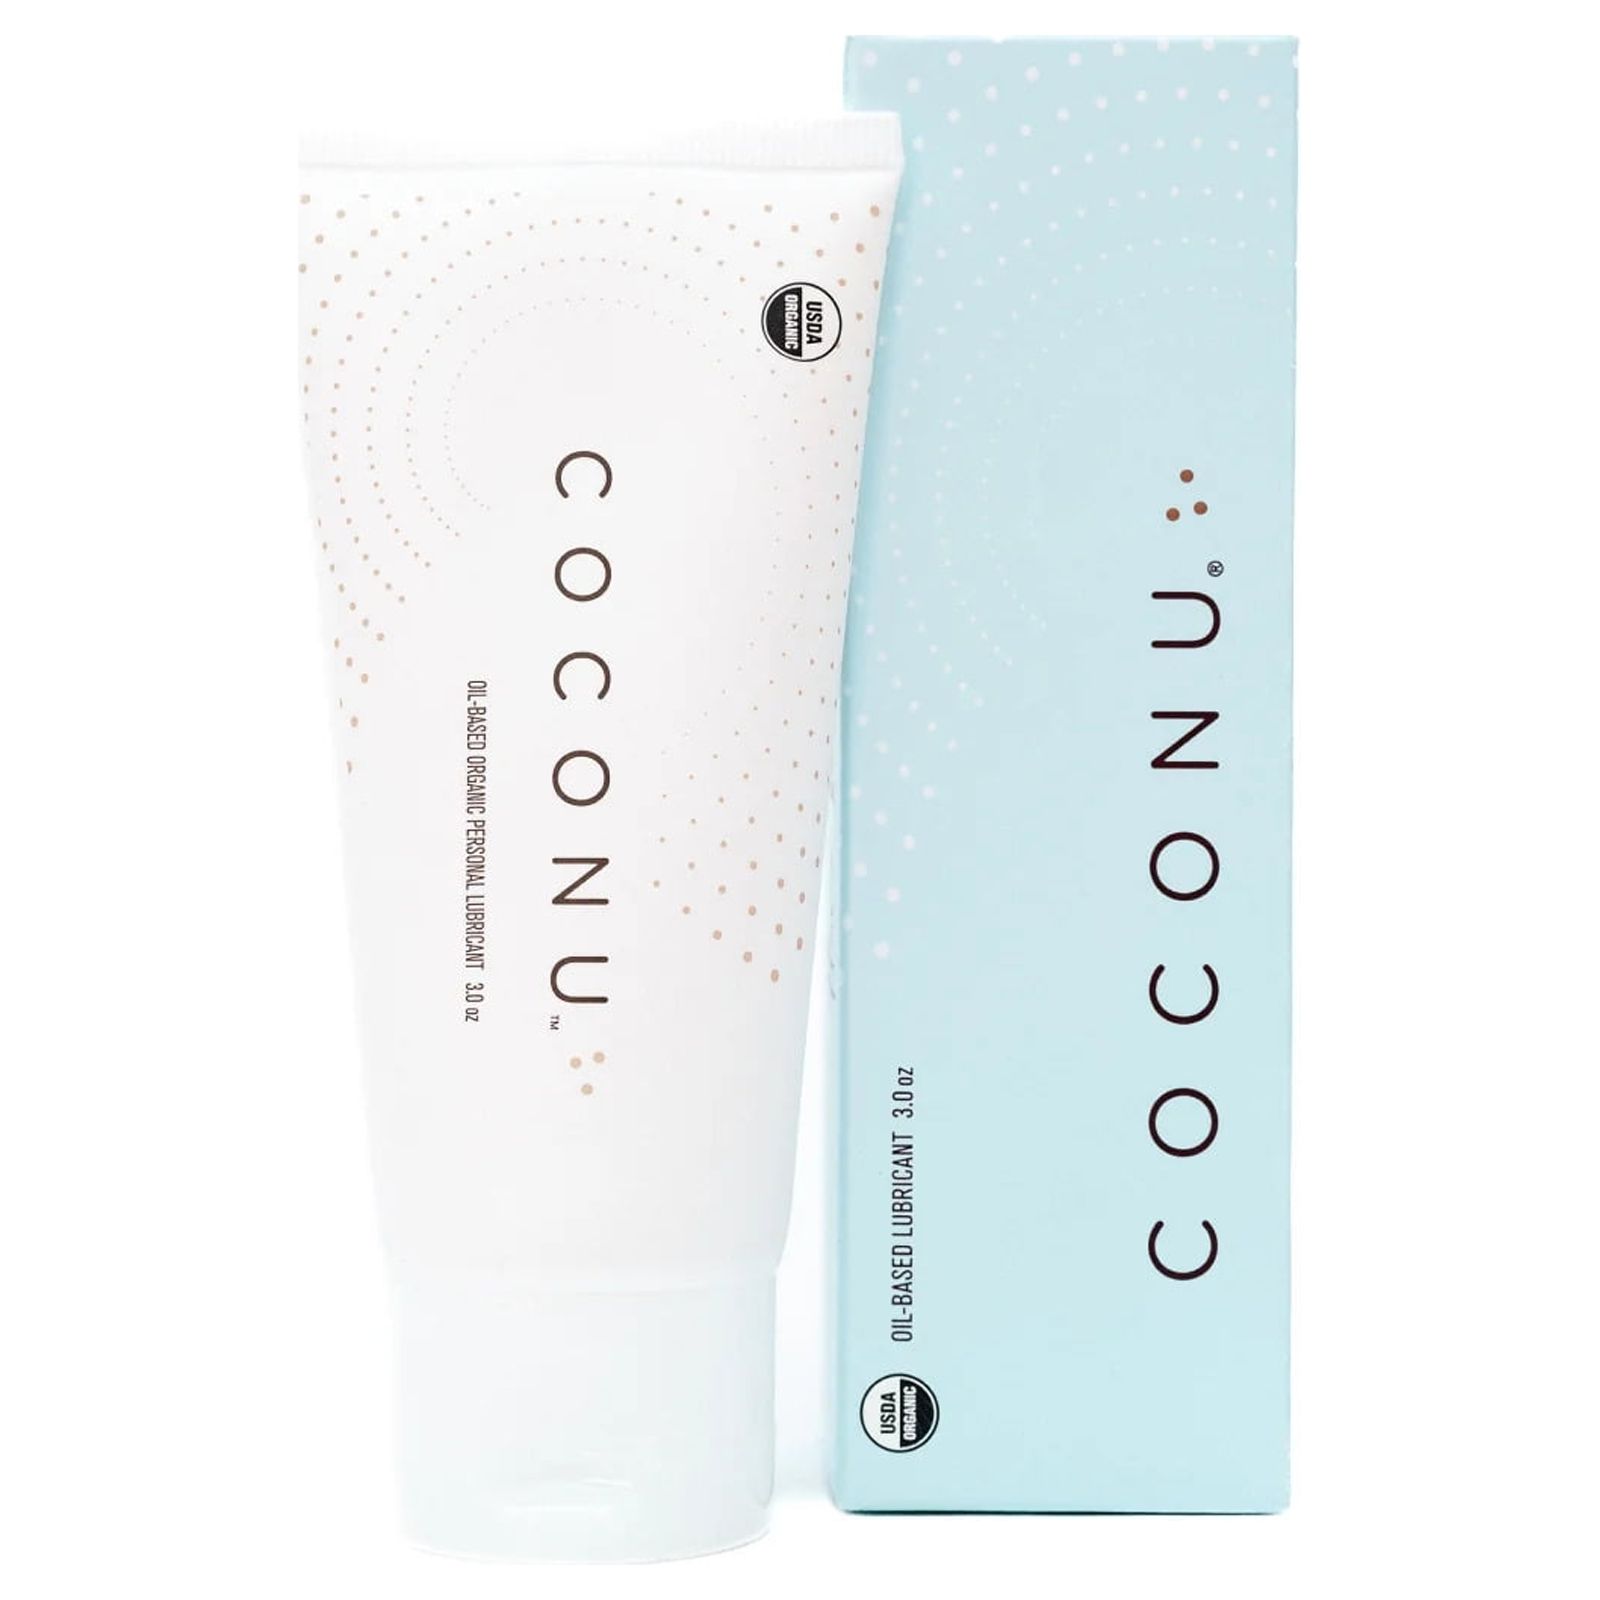 Coconu Oil-based Organic Personal Lubricant 3 Oz. - image 1 of 5